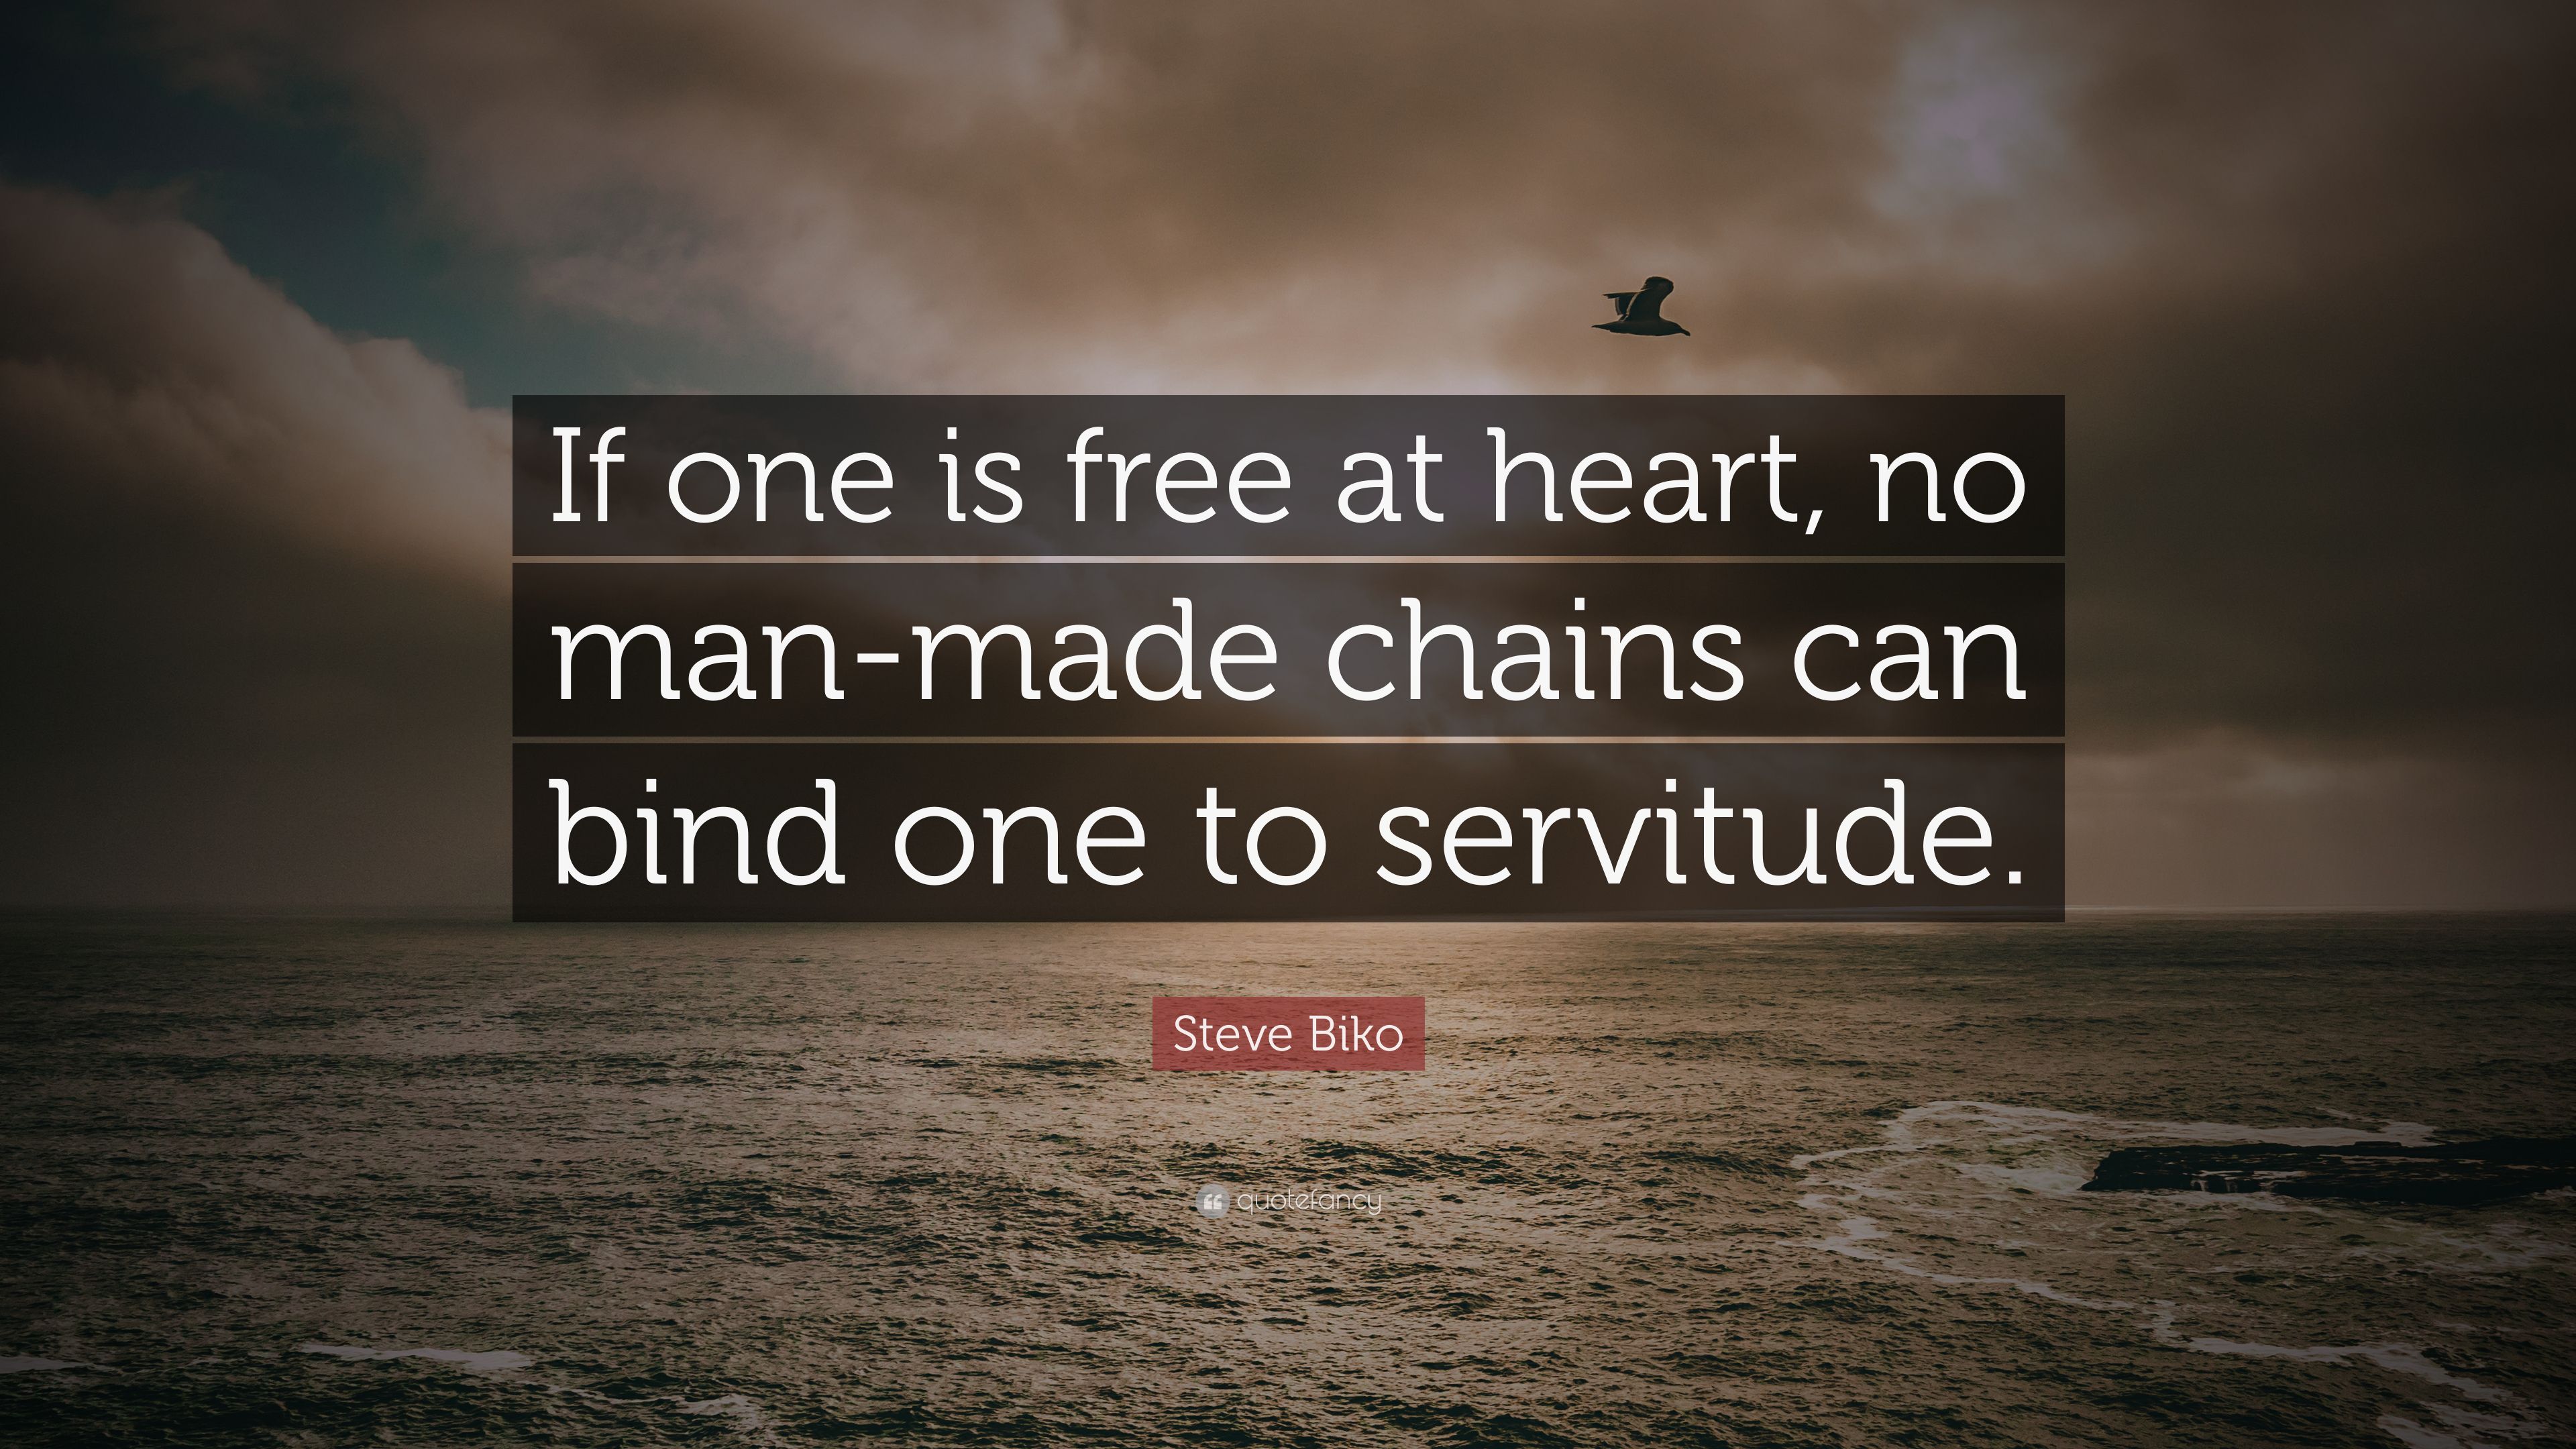 Steve Biko Quote: “If One Is Free At Heart, No Man Made Chains Can Bind One To Servitude.” (9 Wallpaper)